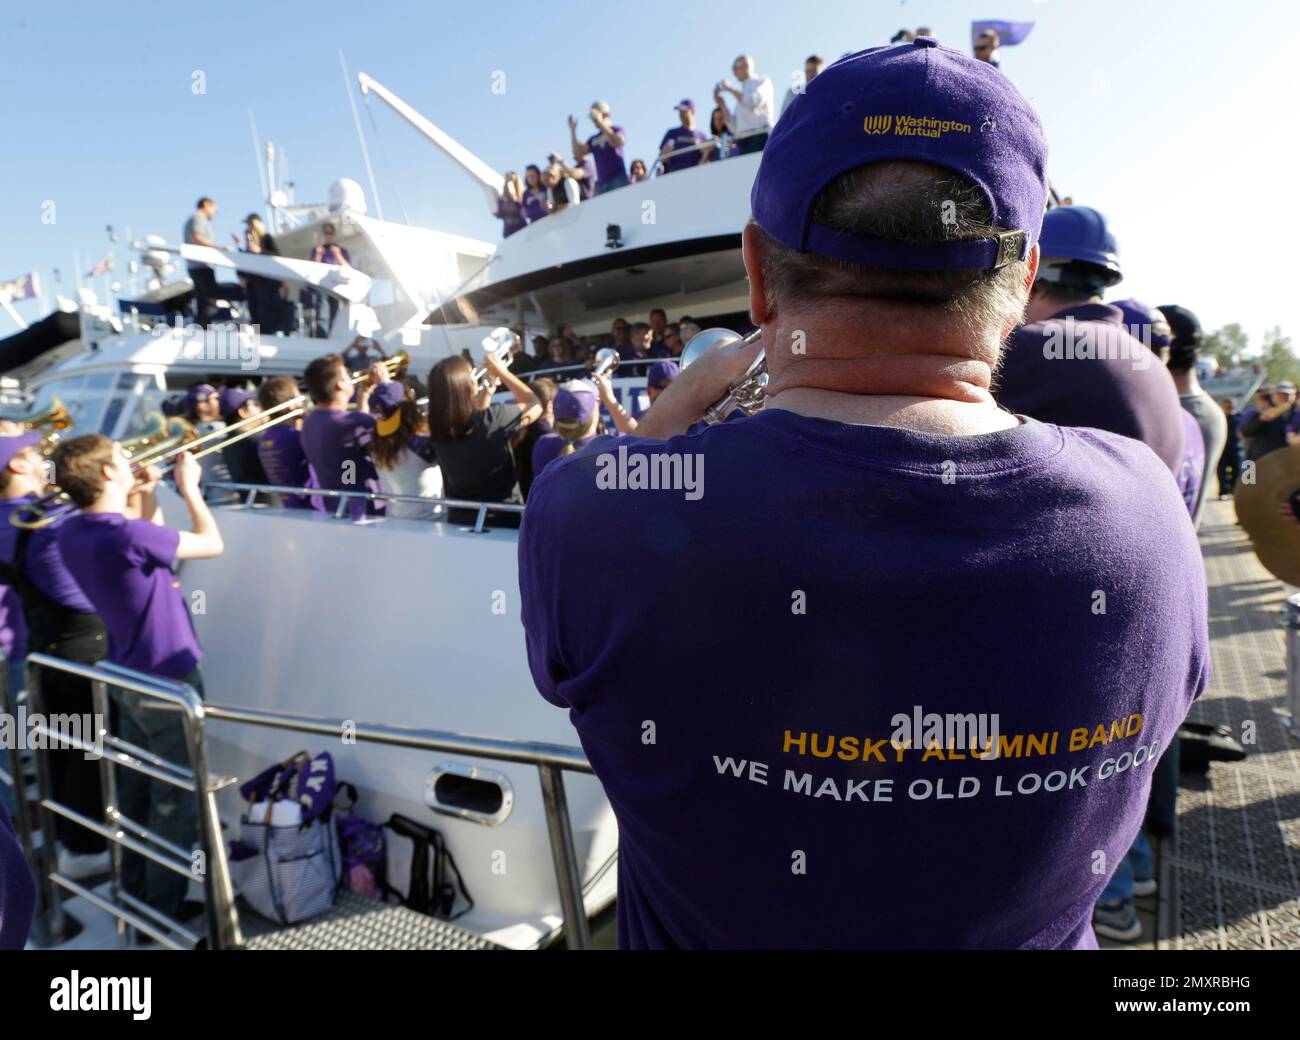 Washington fans "sailgate" on the "Big Dawg" yacht as the Husky Alumni Band plays while docked outside Husky Stadium before the start of an NCAA college football game between Washington and Stanford, Friday, Sept. 30, 2016, in Seattle. In addition to the usual parking lot pre-game festivities, the stadium's location on Lake Washington draws crowds on boats as well. (AP Photo/Ted S. Warren) Stock Photo